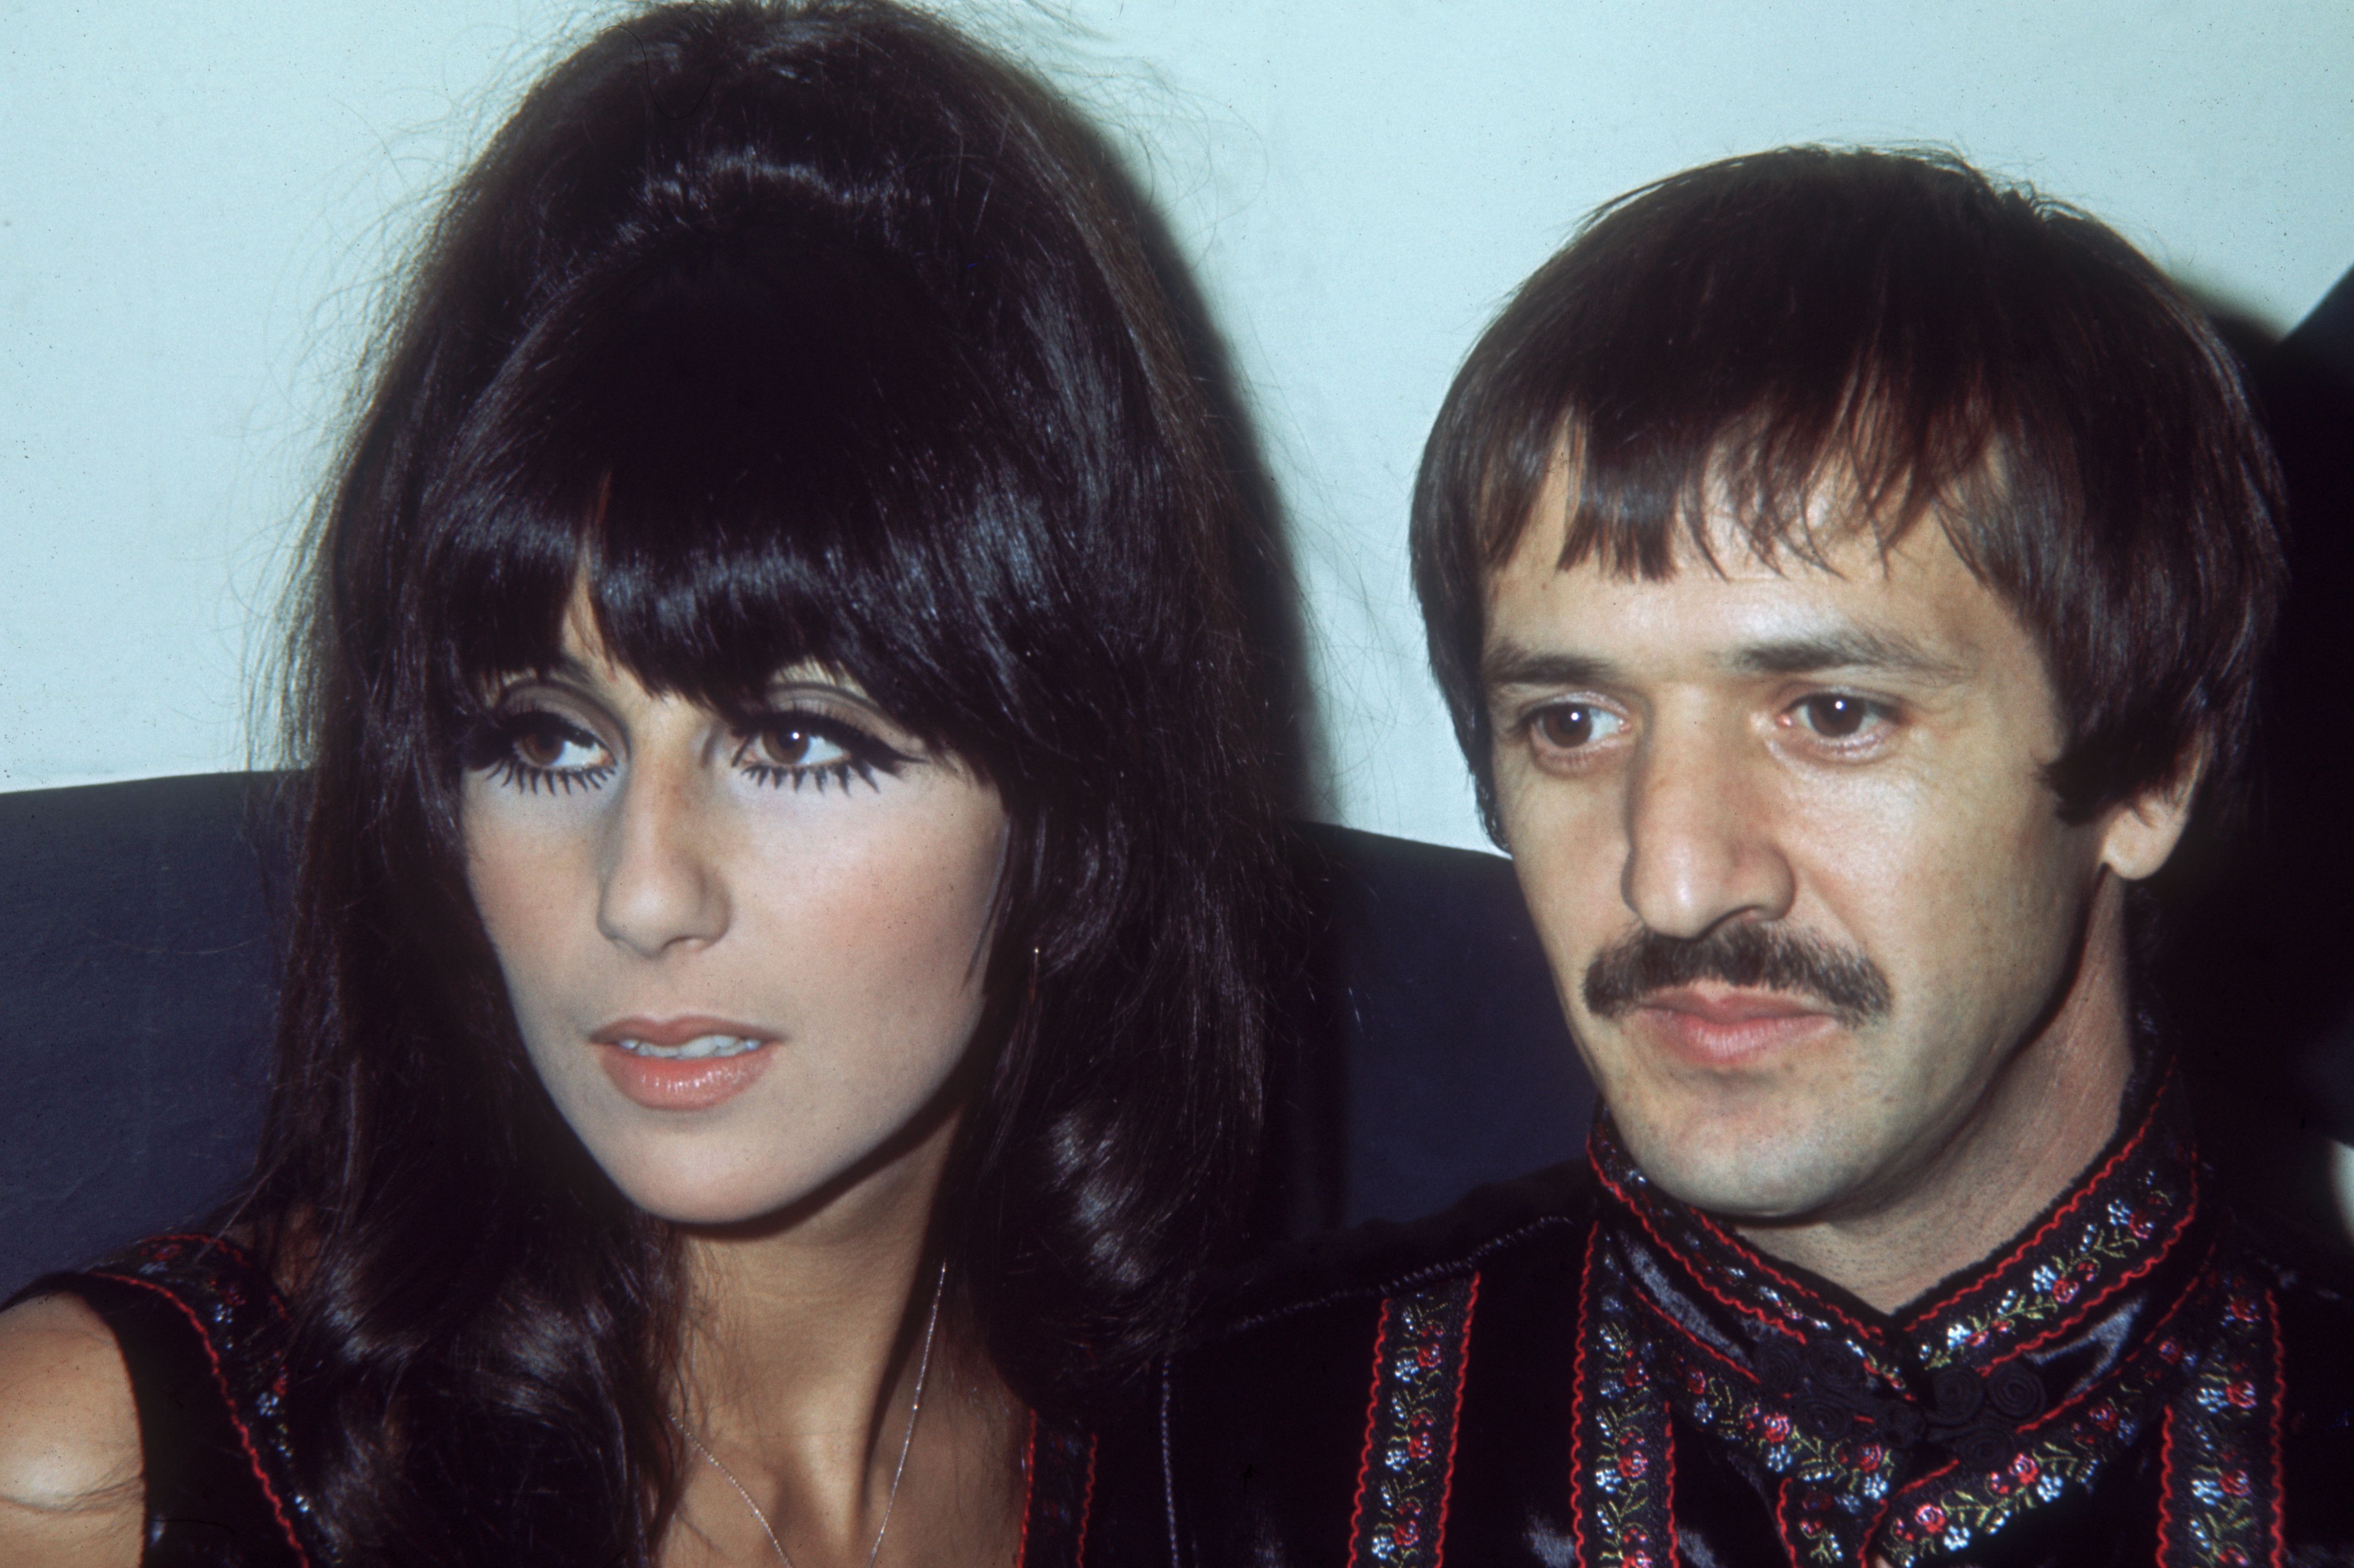 Singers Cher and Sonny Bono pictured on December 12, 1967 | Source: Getty Images